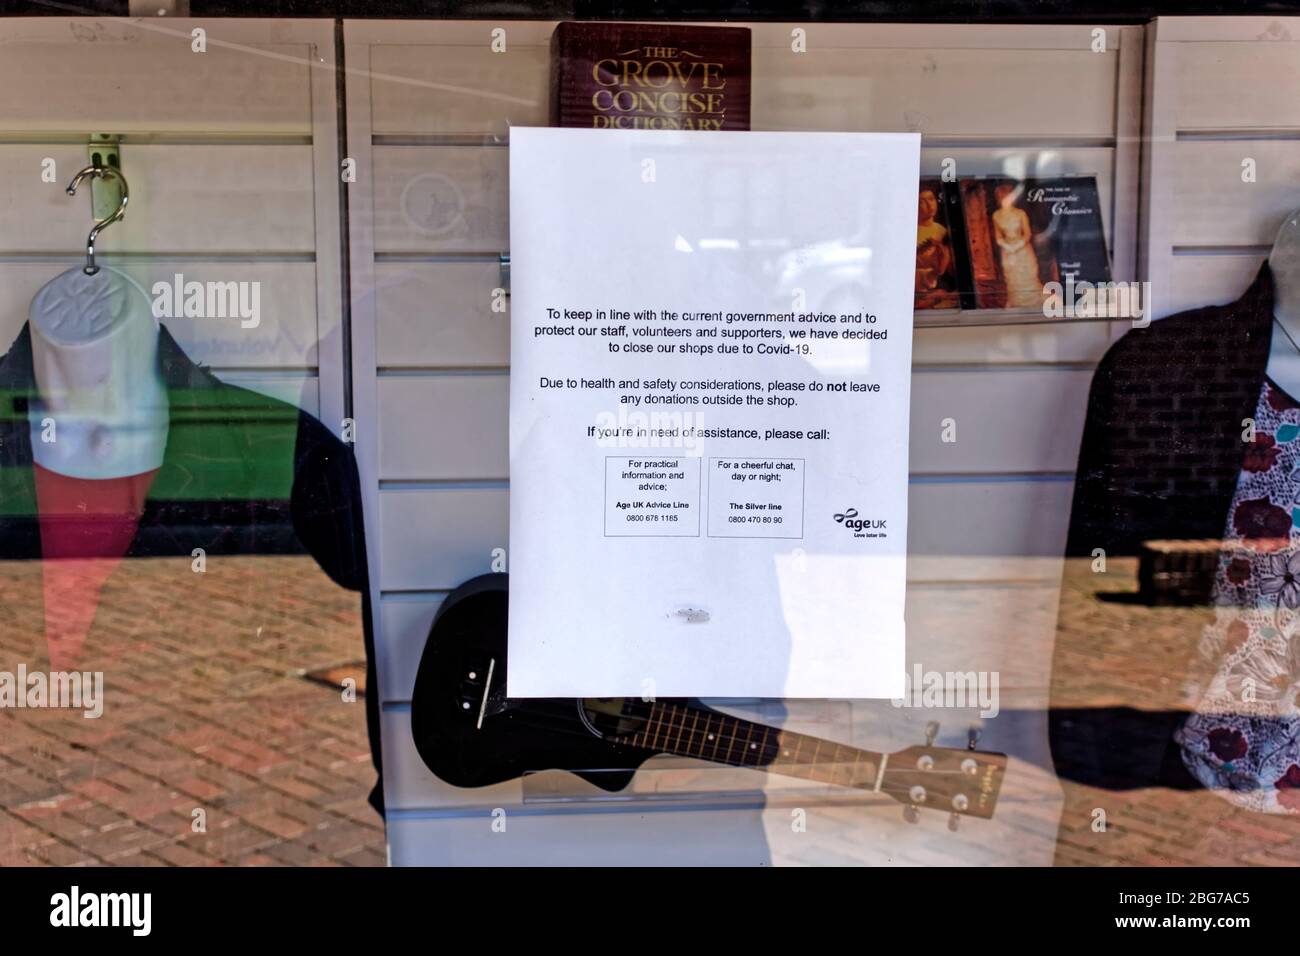 Warminster, Wiltshire / UK - April 15 2019: A Closed due to Coronavirus sign in the window of the Age UK Charity Shop in Warminster, Wiltshire, UK Stock Photo